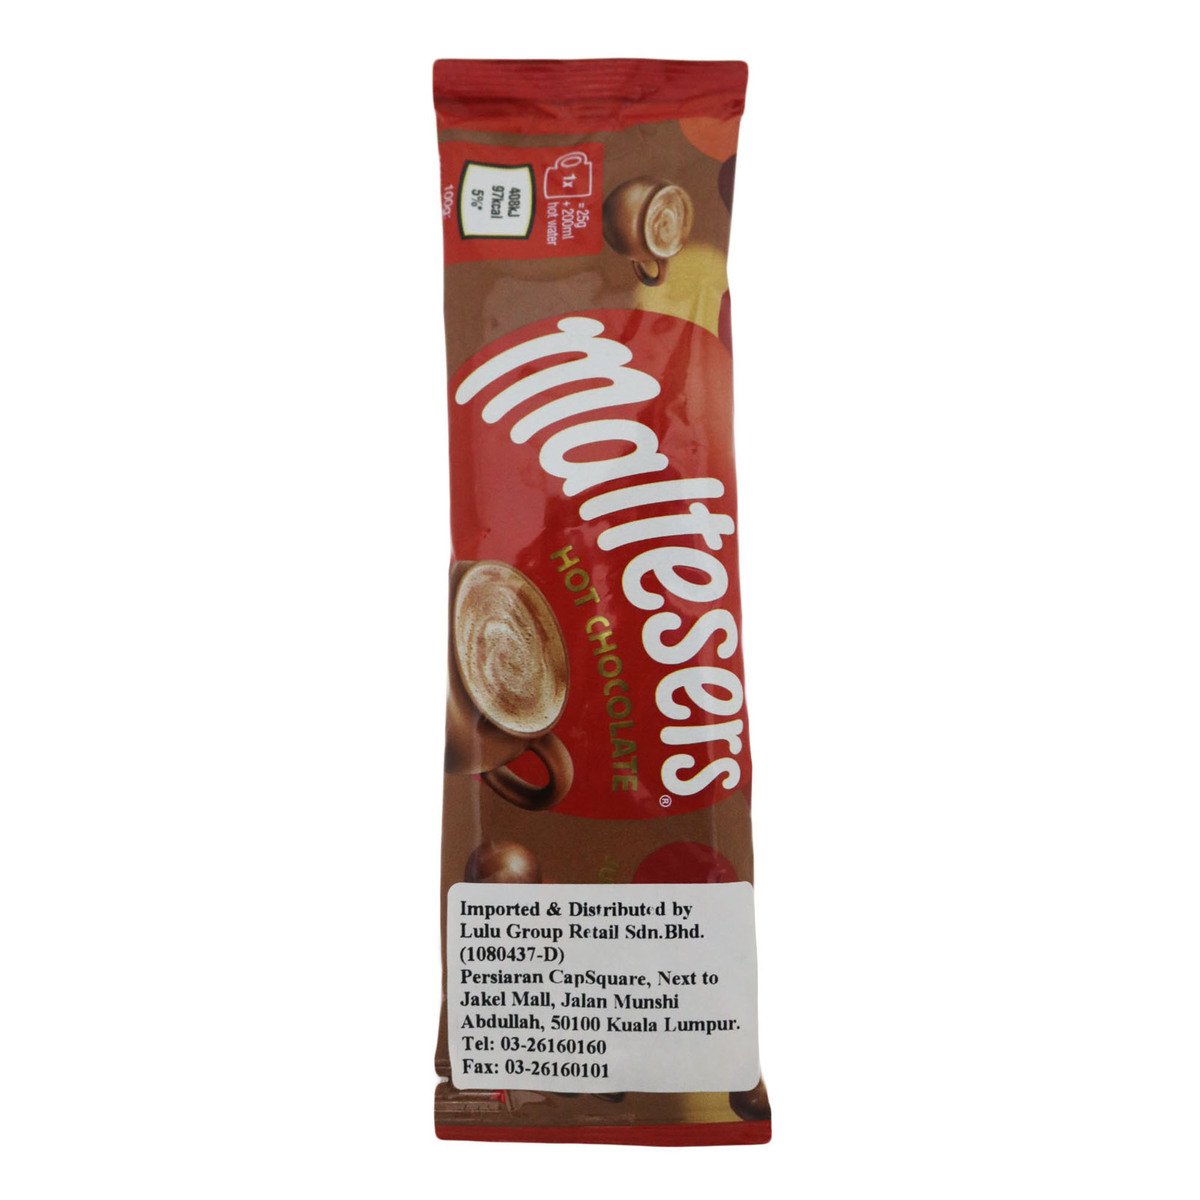 Malters Ins Hot Chocolate Drink 25g